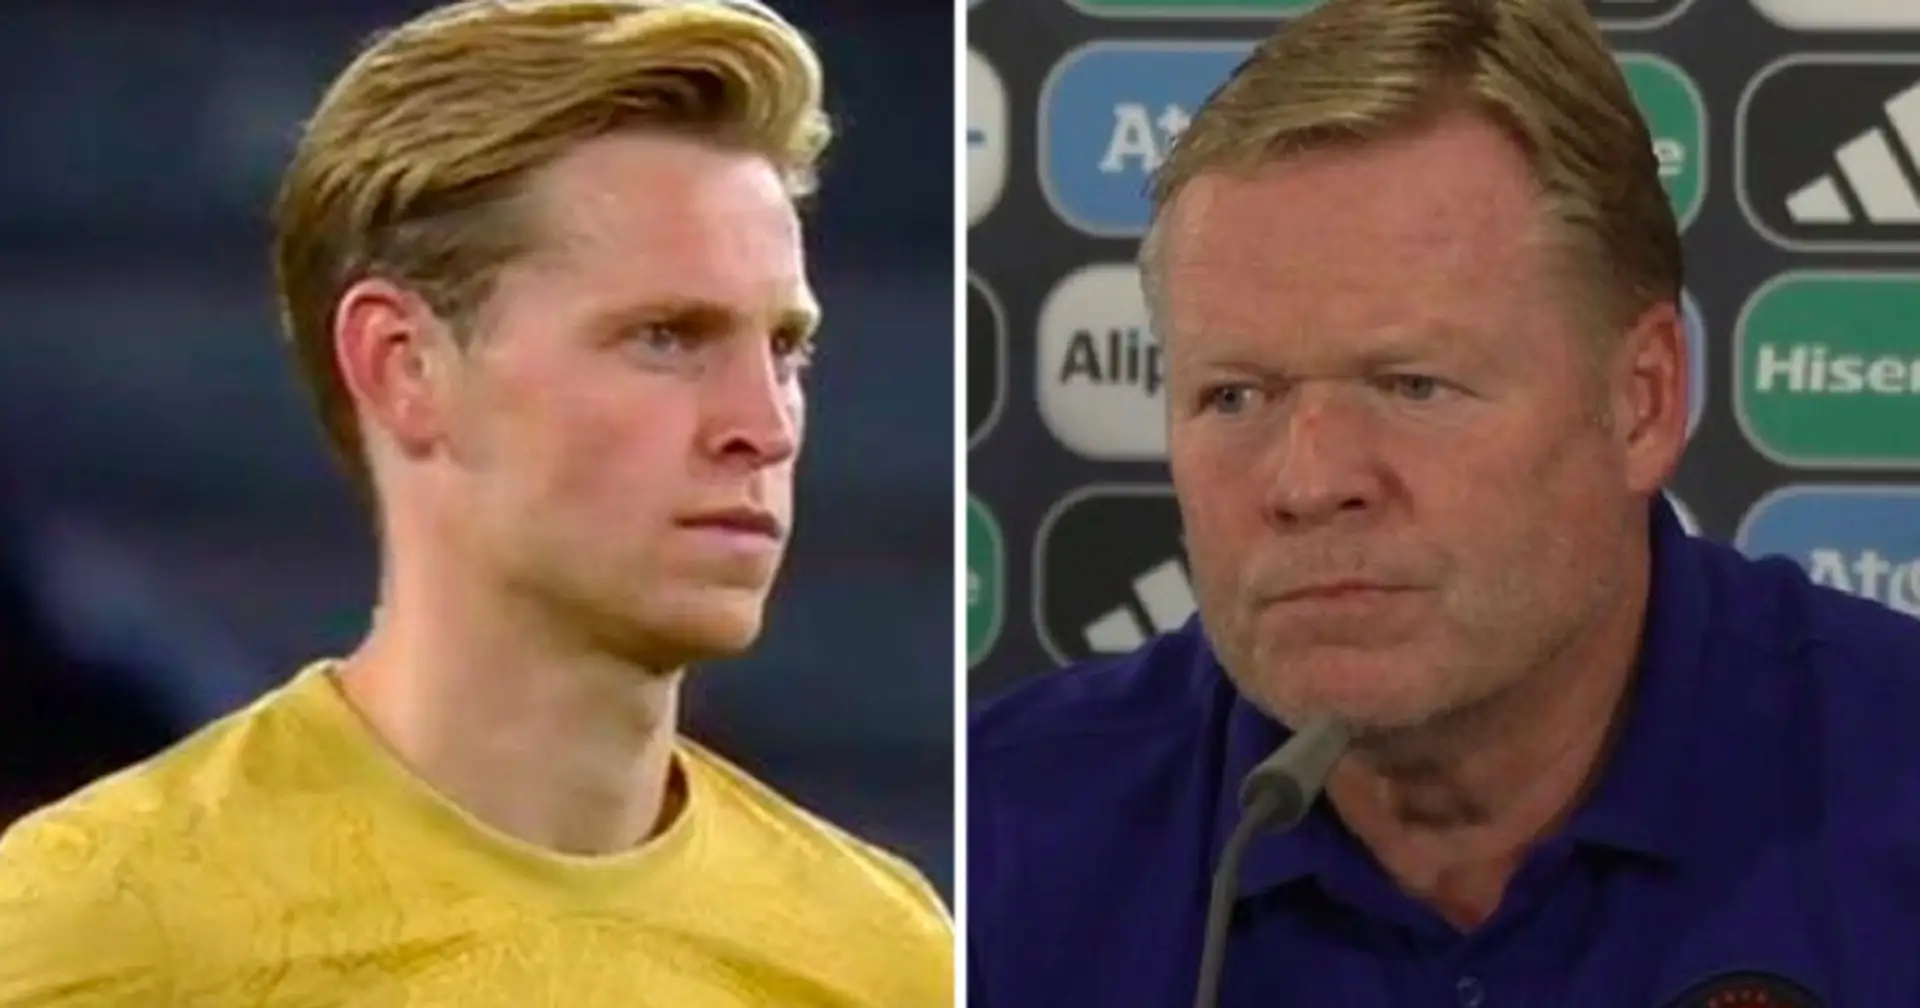 Koeman's latest words about De Jong may encourage Barca to reconsider captain hierarchy